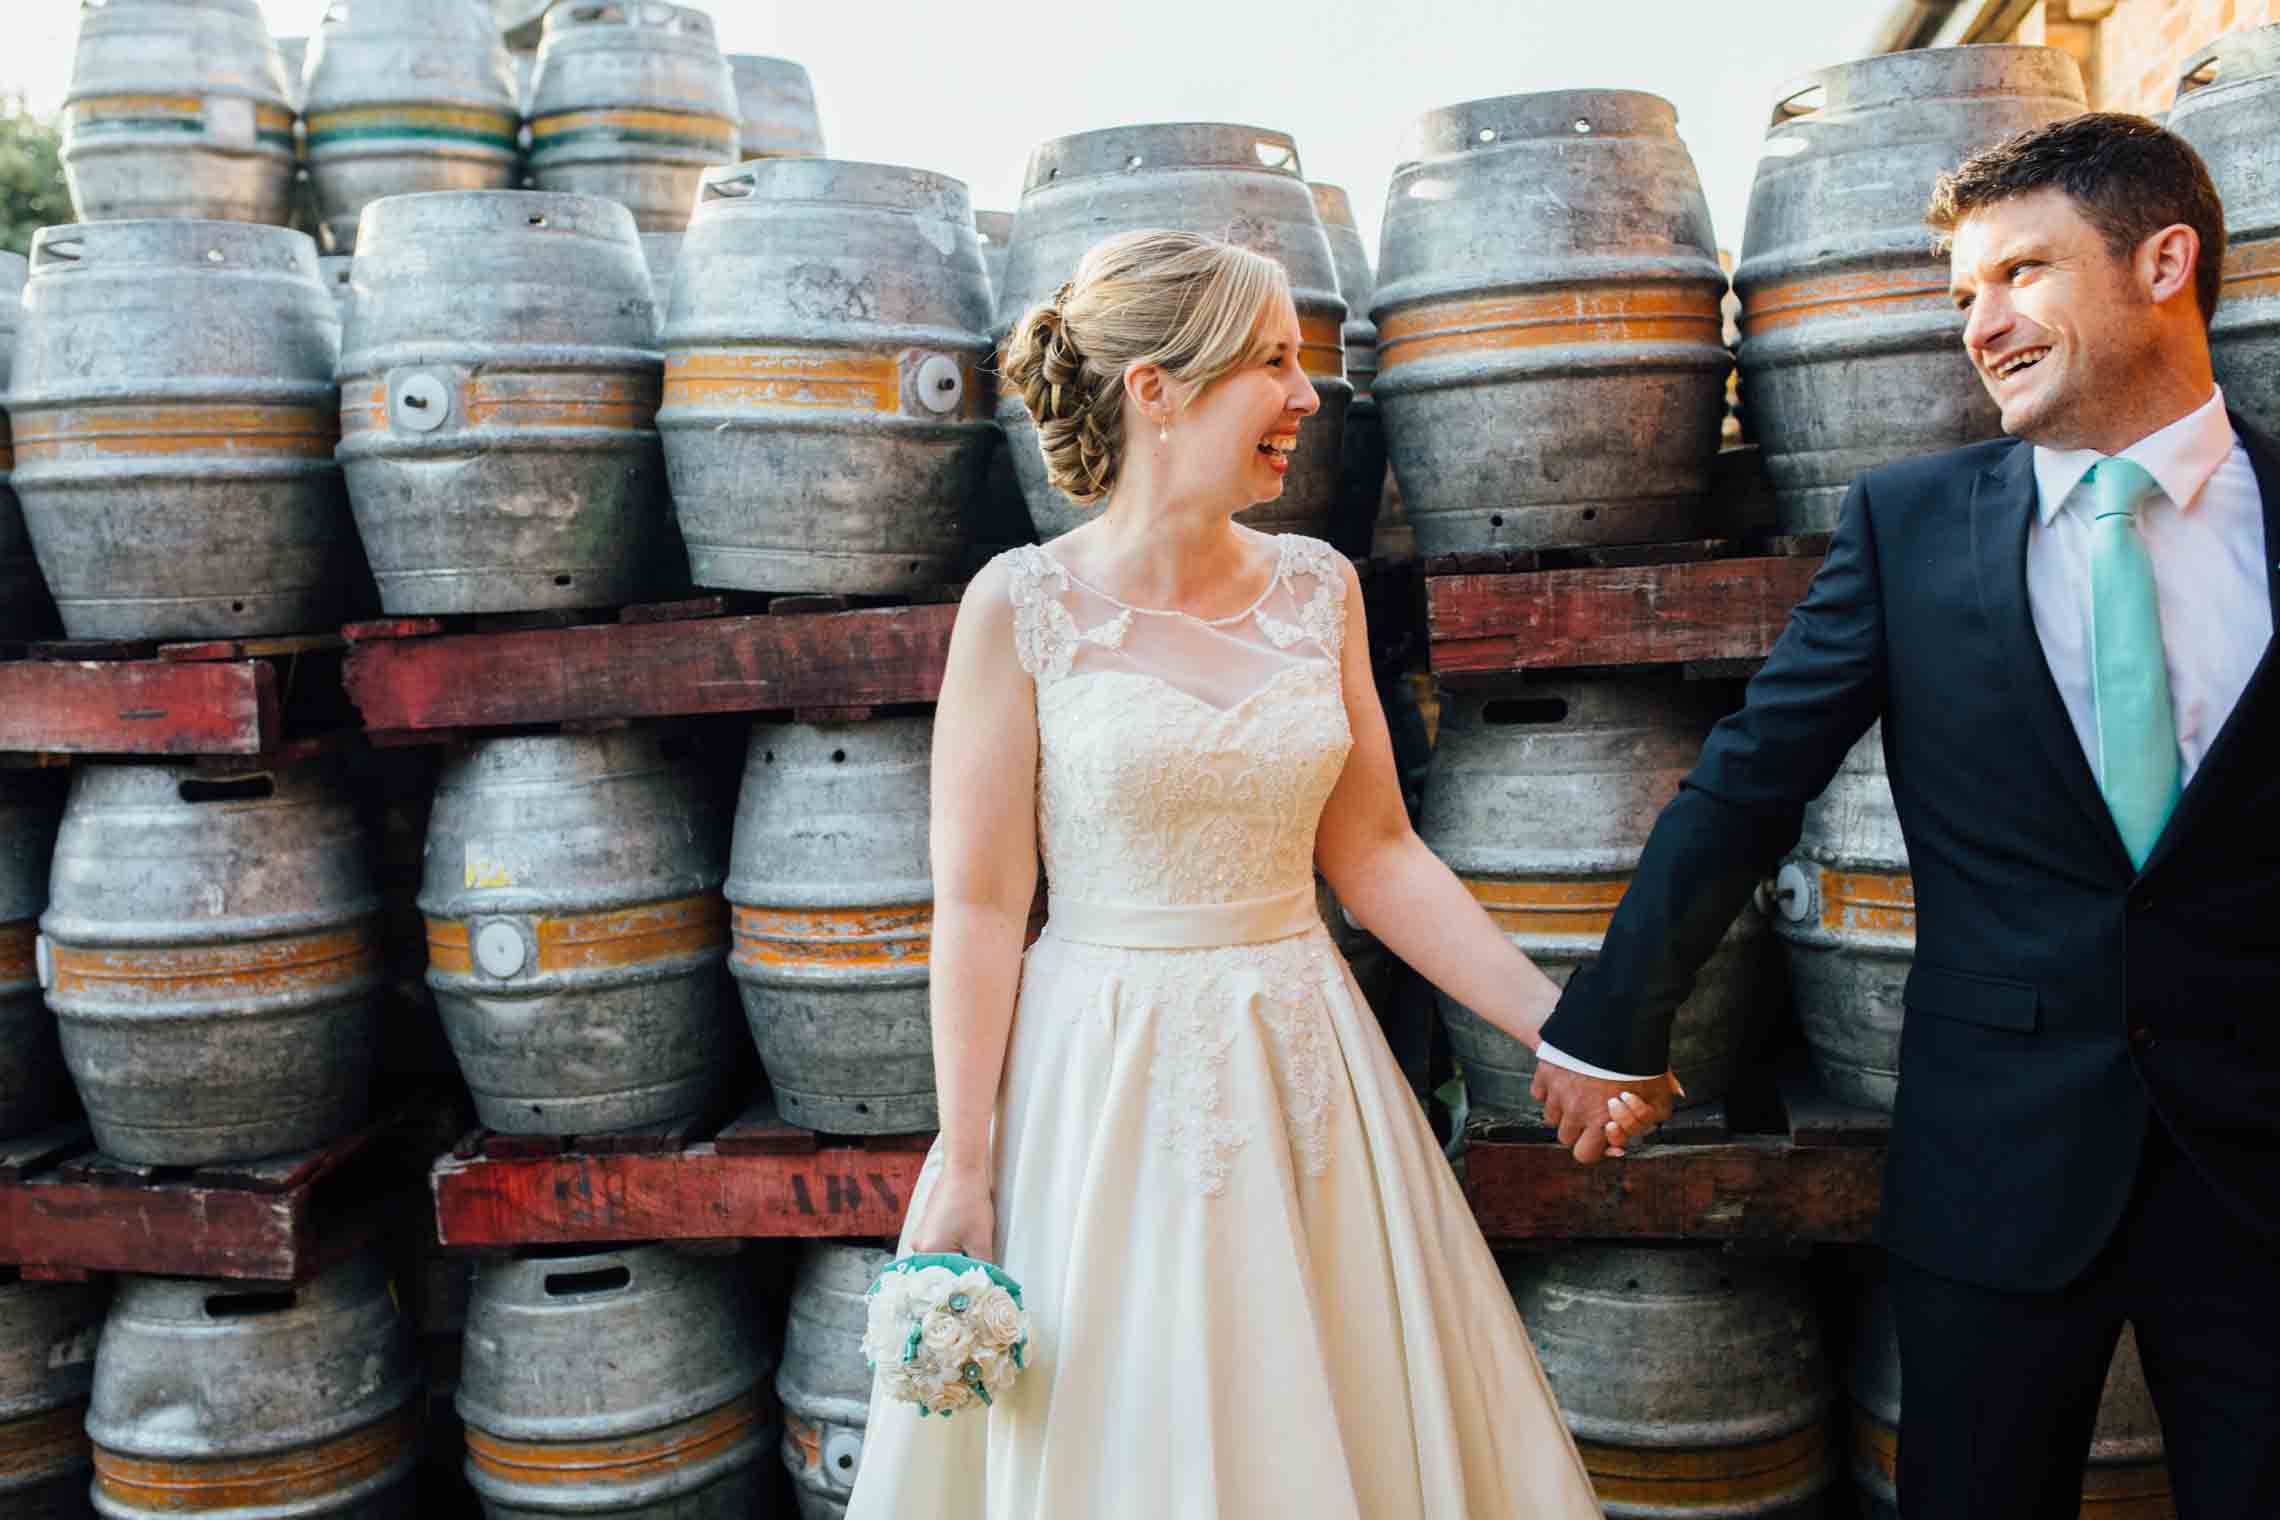 Wedding Photography of newlyweds at St Peters Brewery Hall